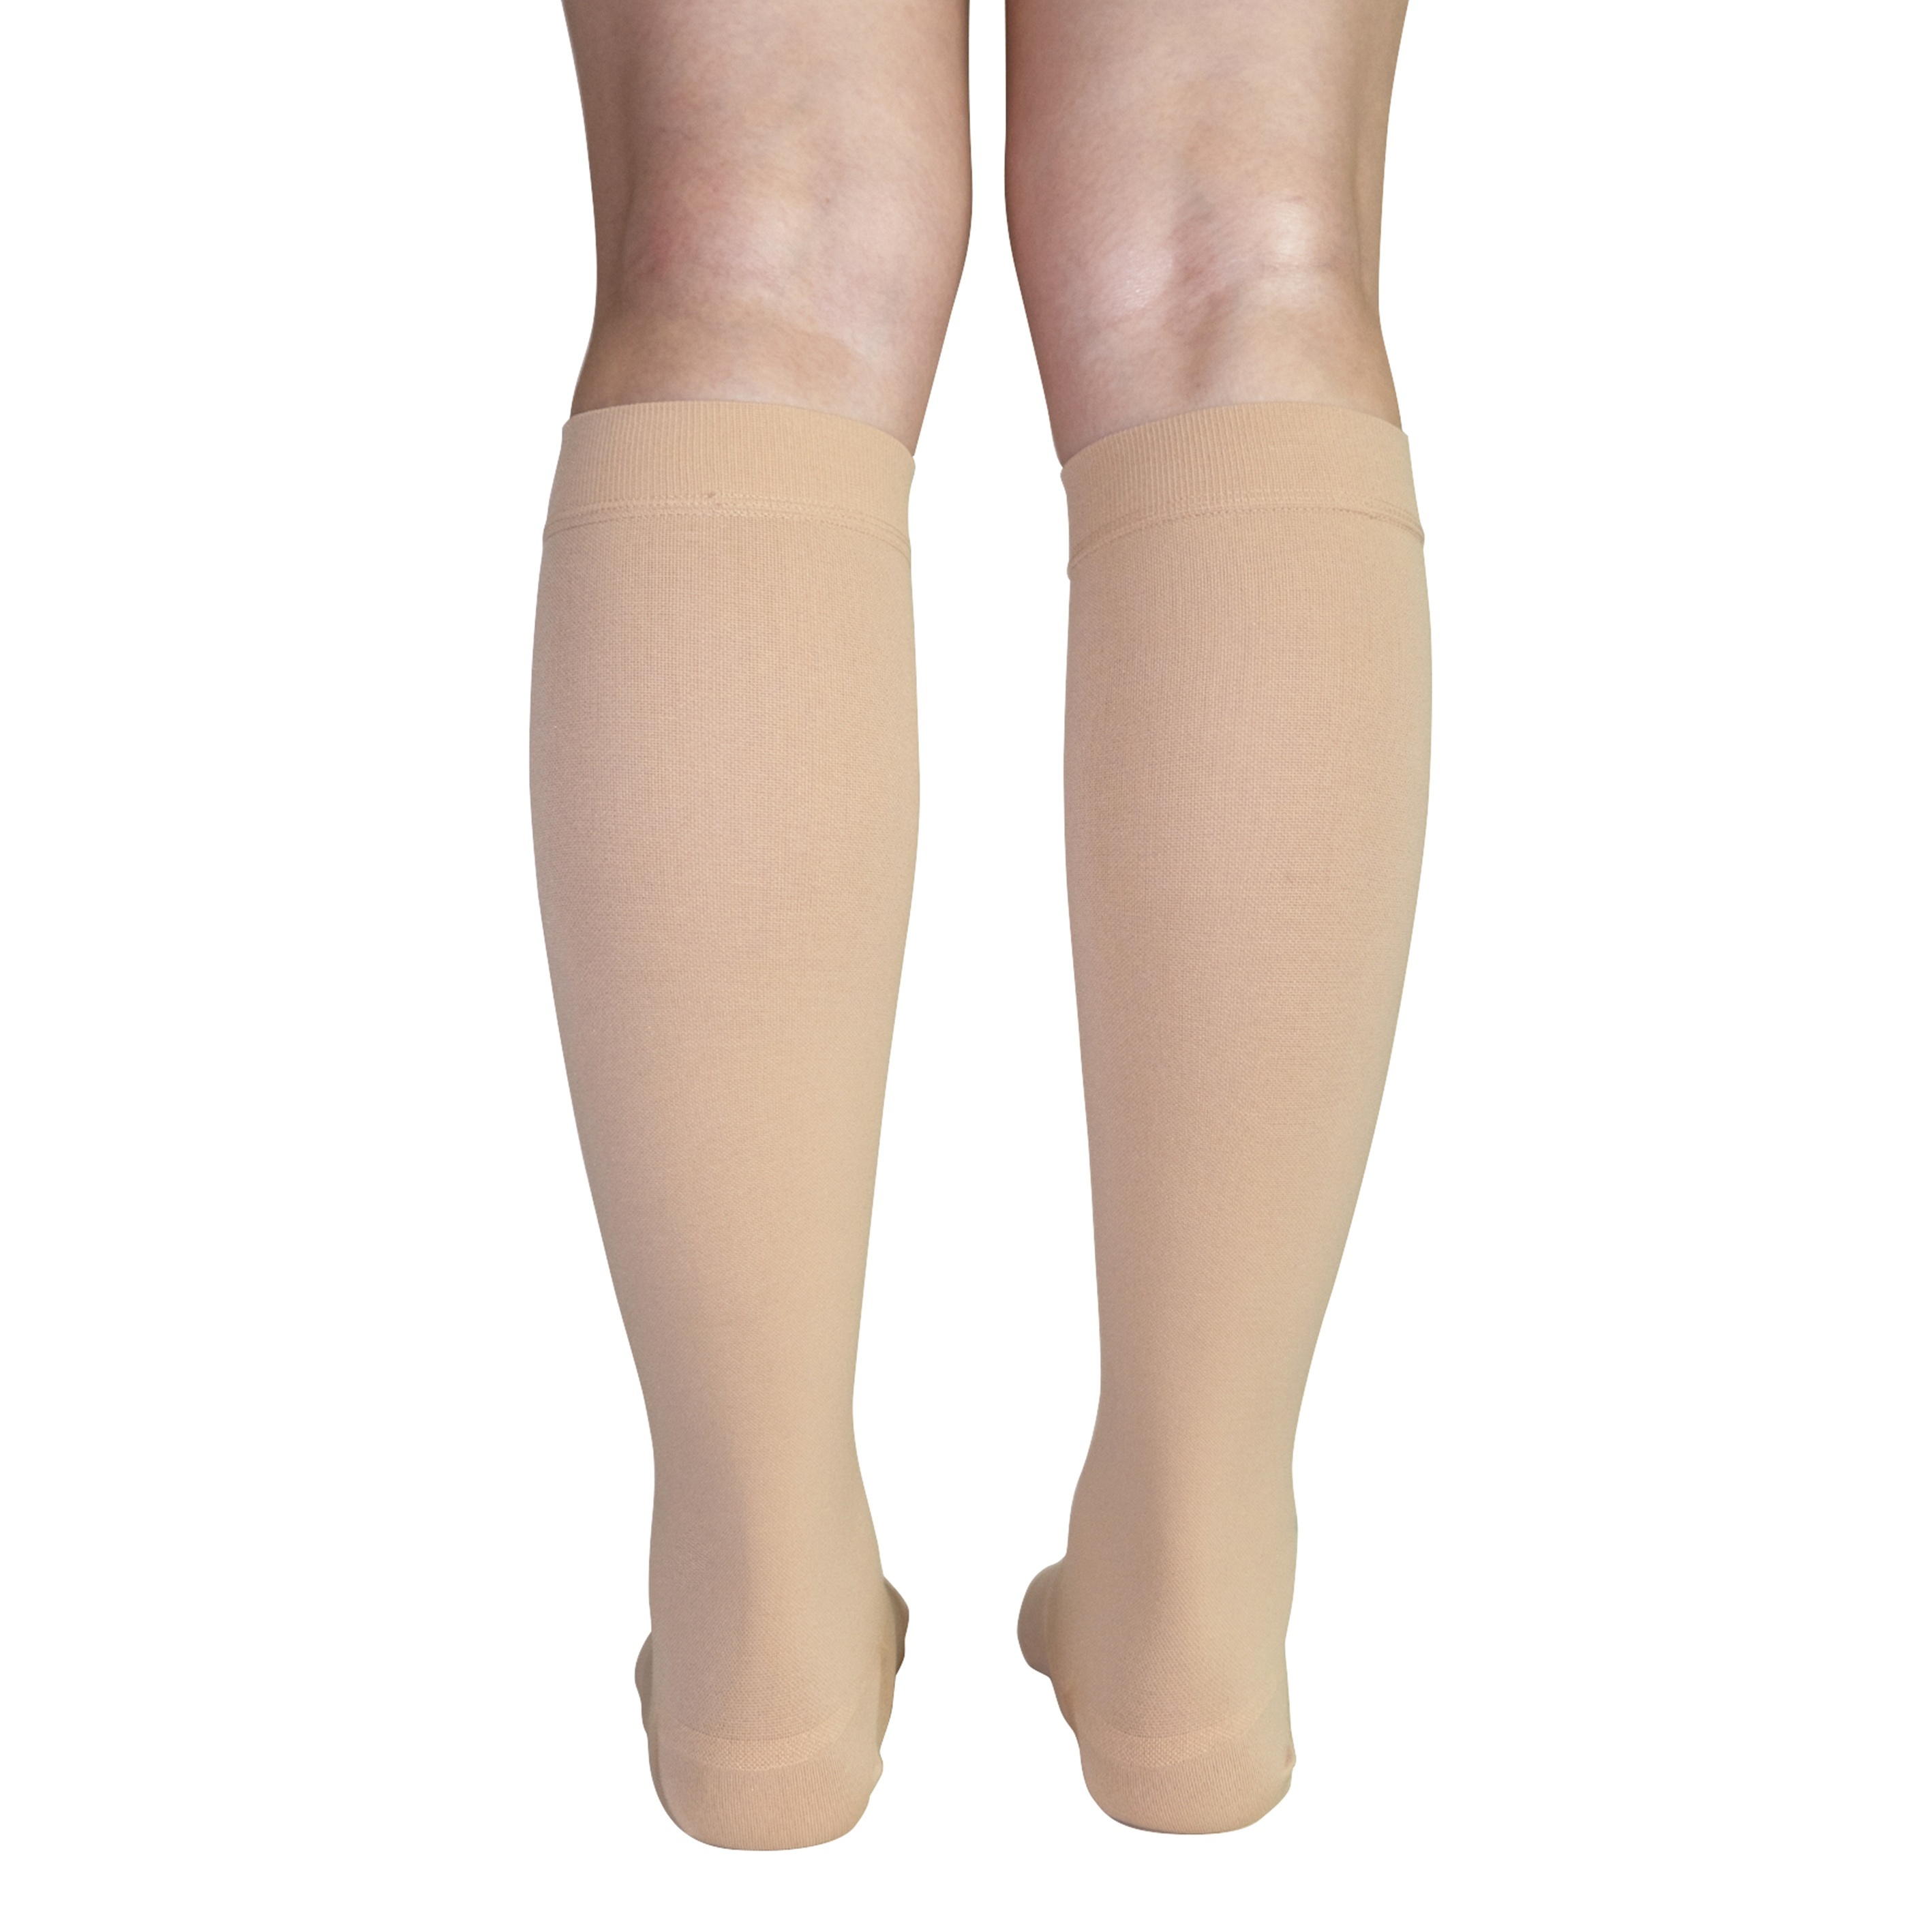 1 Pair Wukang Knee High Graduated Compression Stockings 20-30 mmhg Open Toe  Compression Socks for Women and Men 